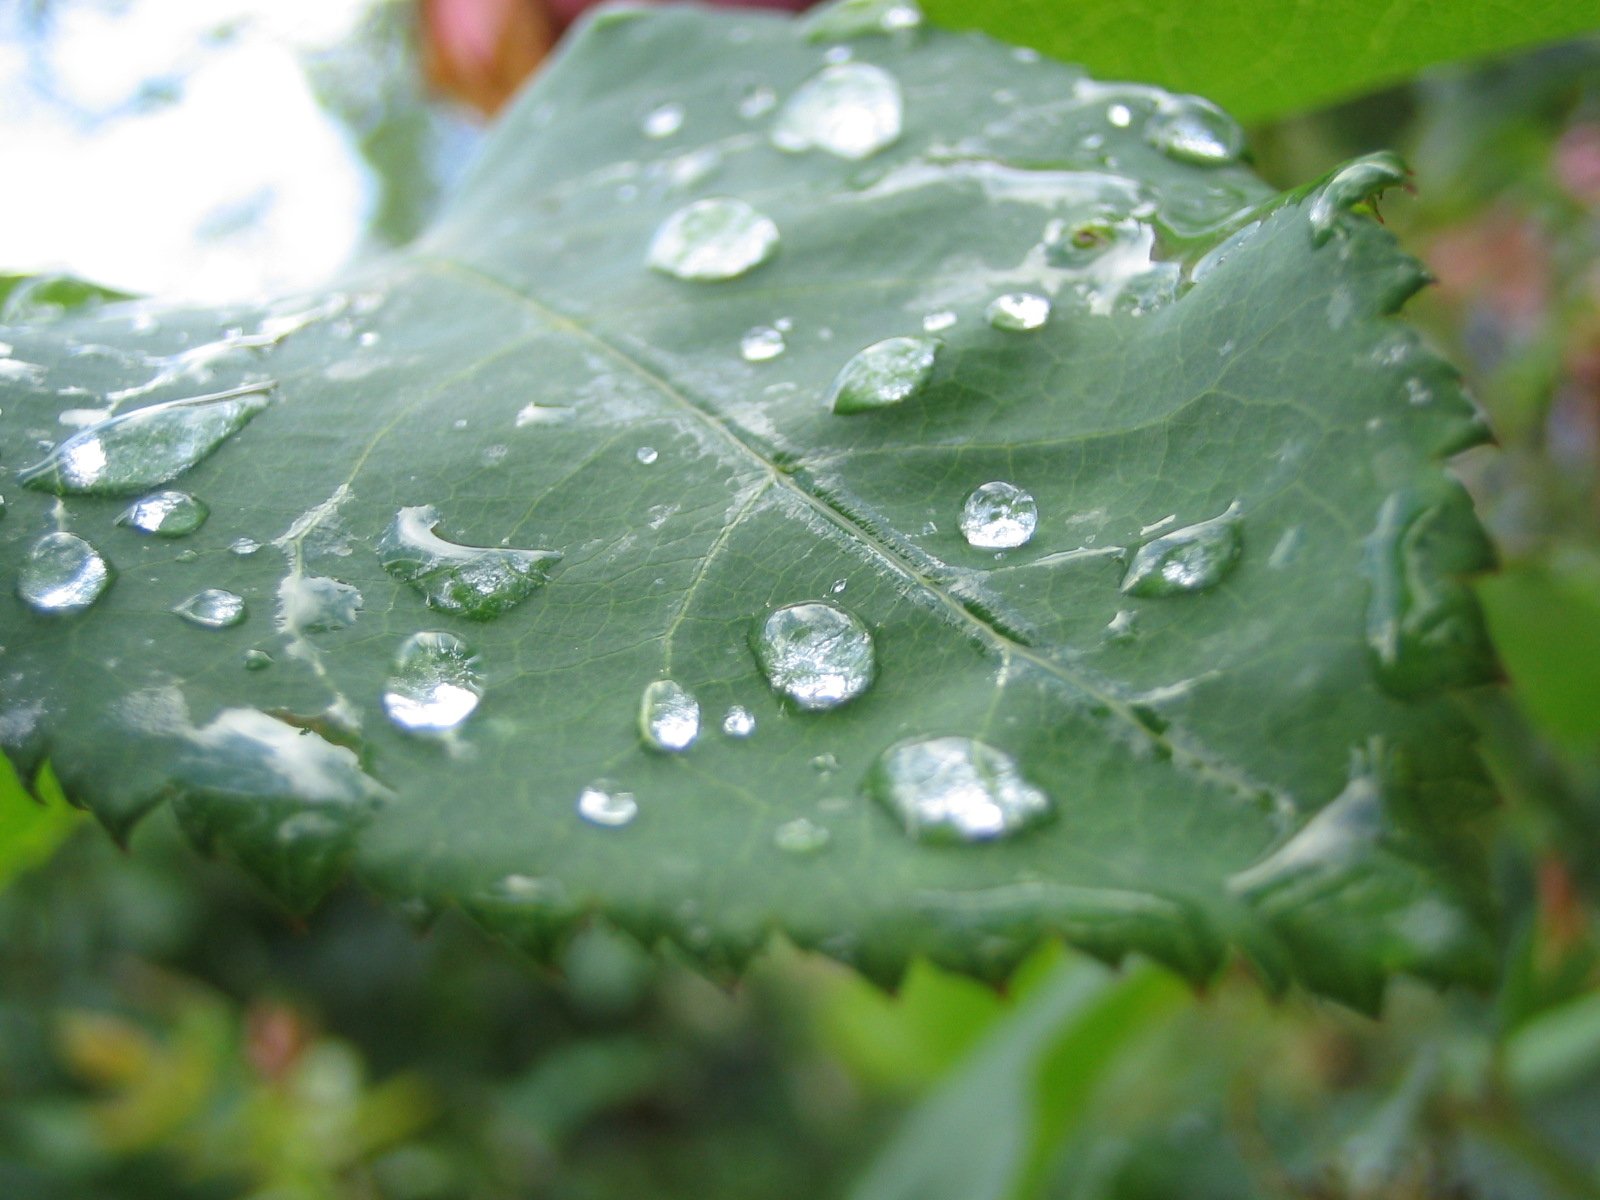 the water is on the large leaf